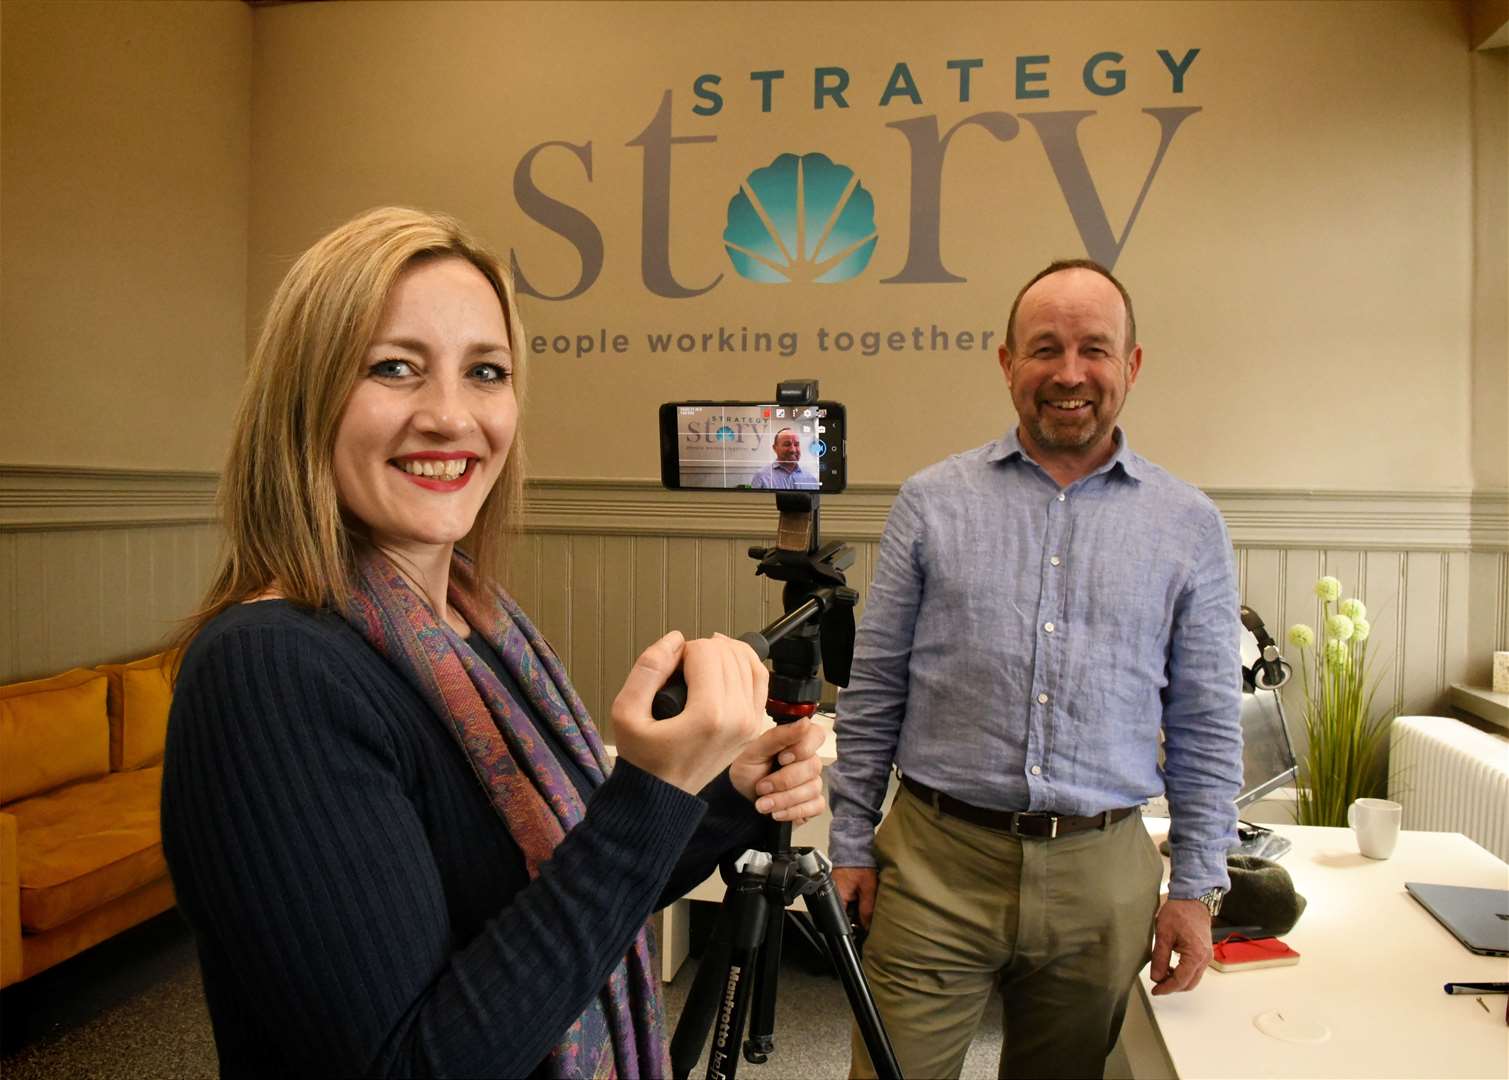 Kate Hooper and Donald MacLean, co-founders and co-directors of Strategy Story.